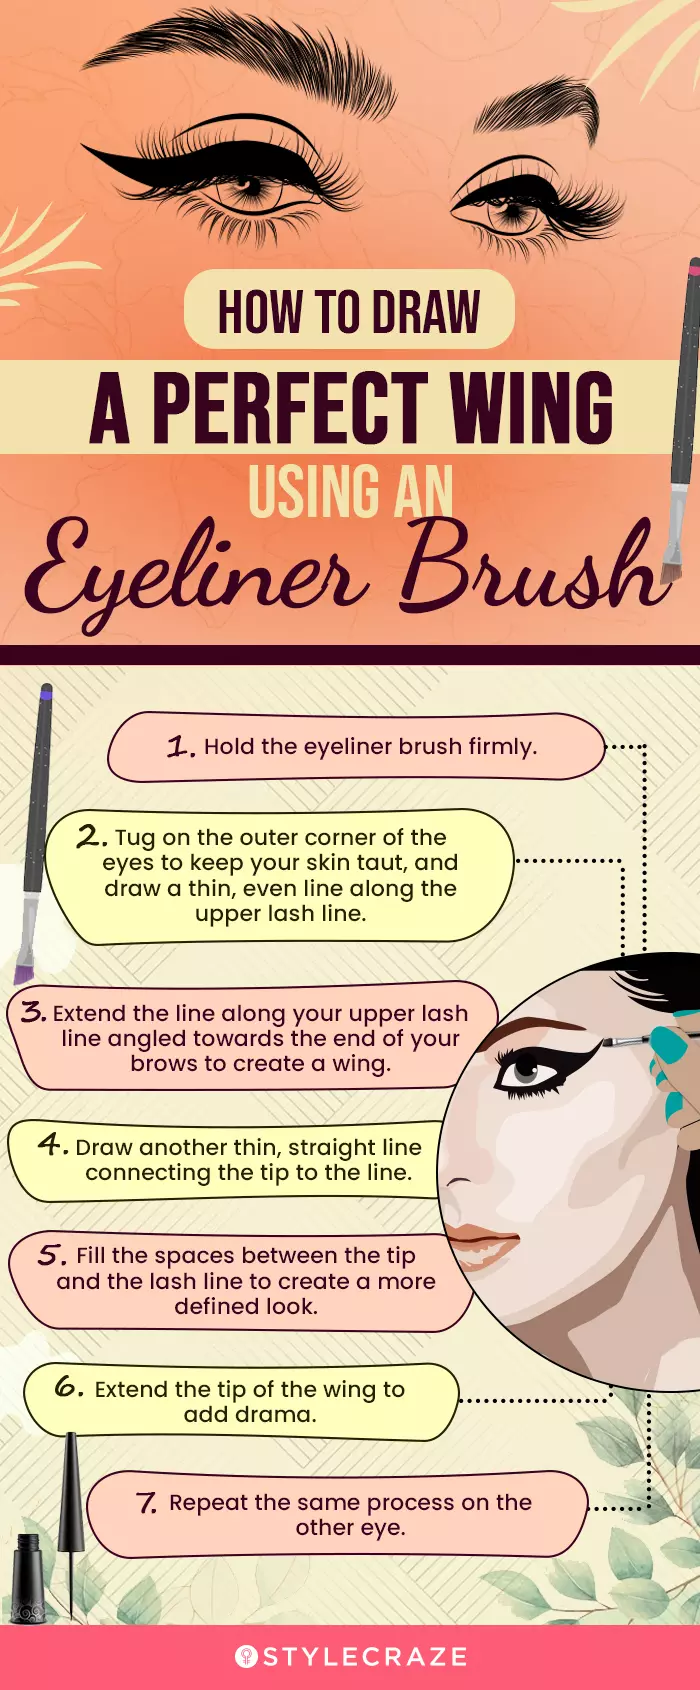 How To Draw A Perfect Wing Using An Eyeliner Brush